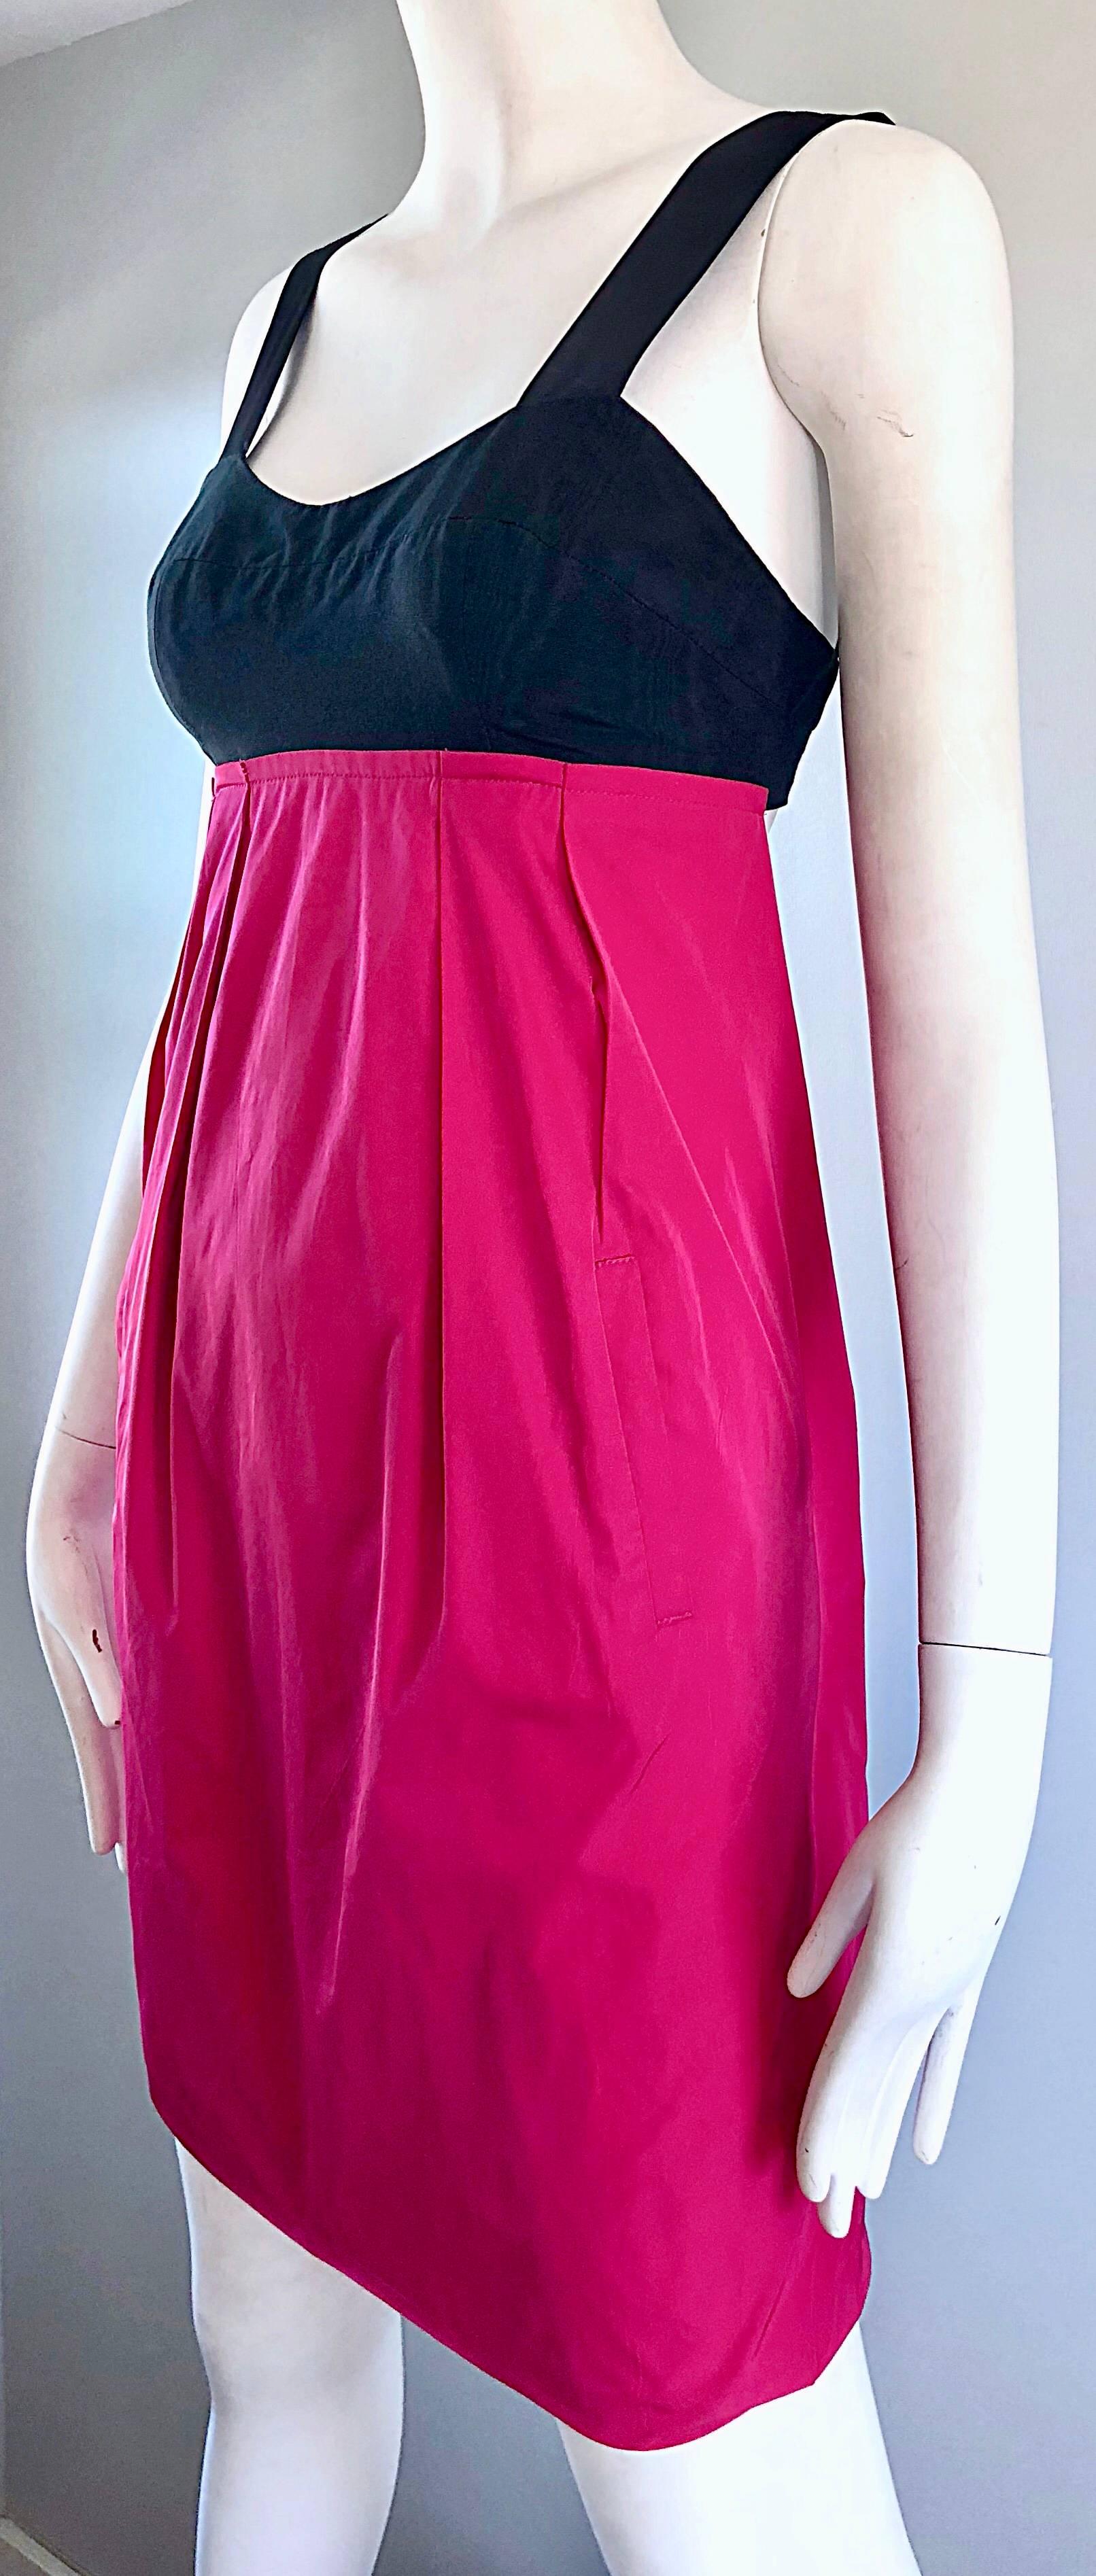 Yigal Azrouel Size 2 / 4 Hot Pink and Black Color Block Open Back Shift Dress In Excellent Condition For Sale In San Diego, CA